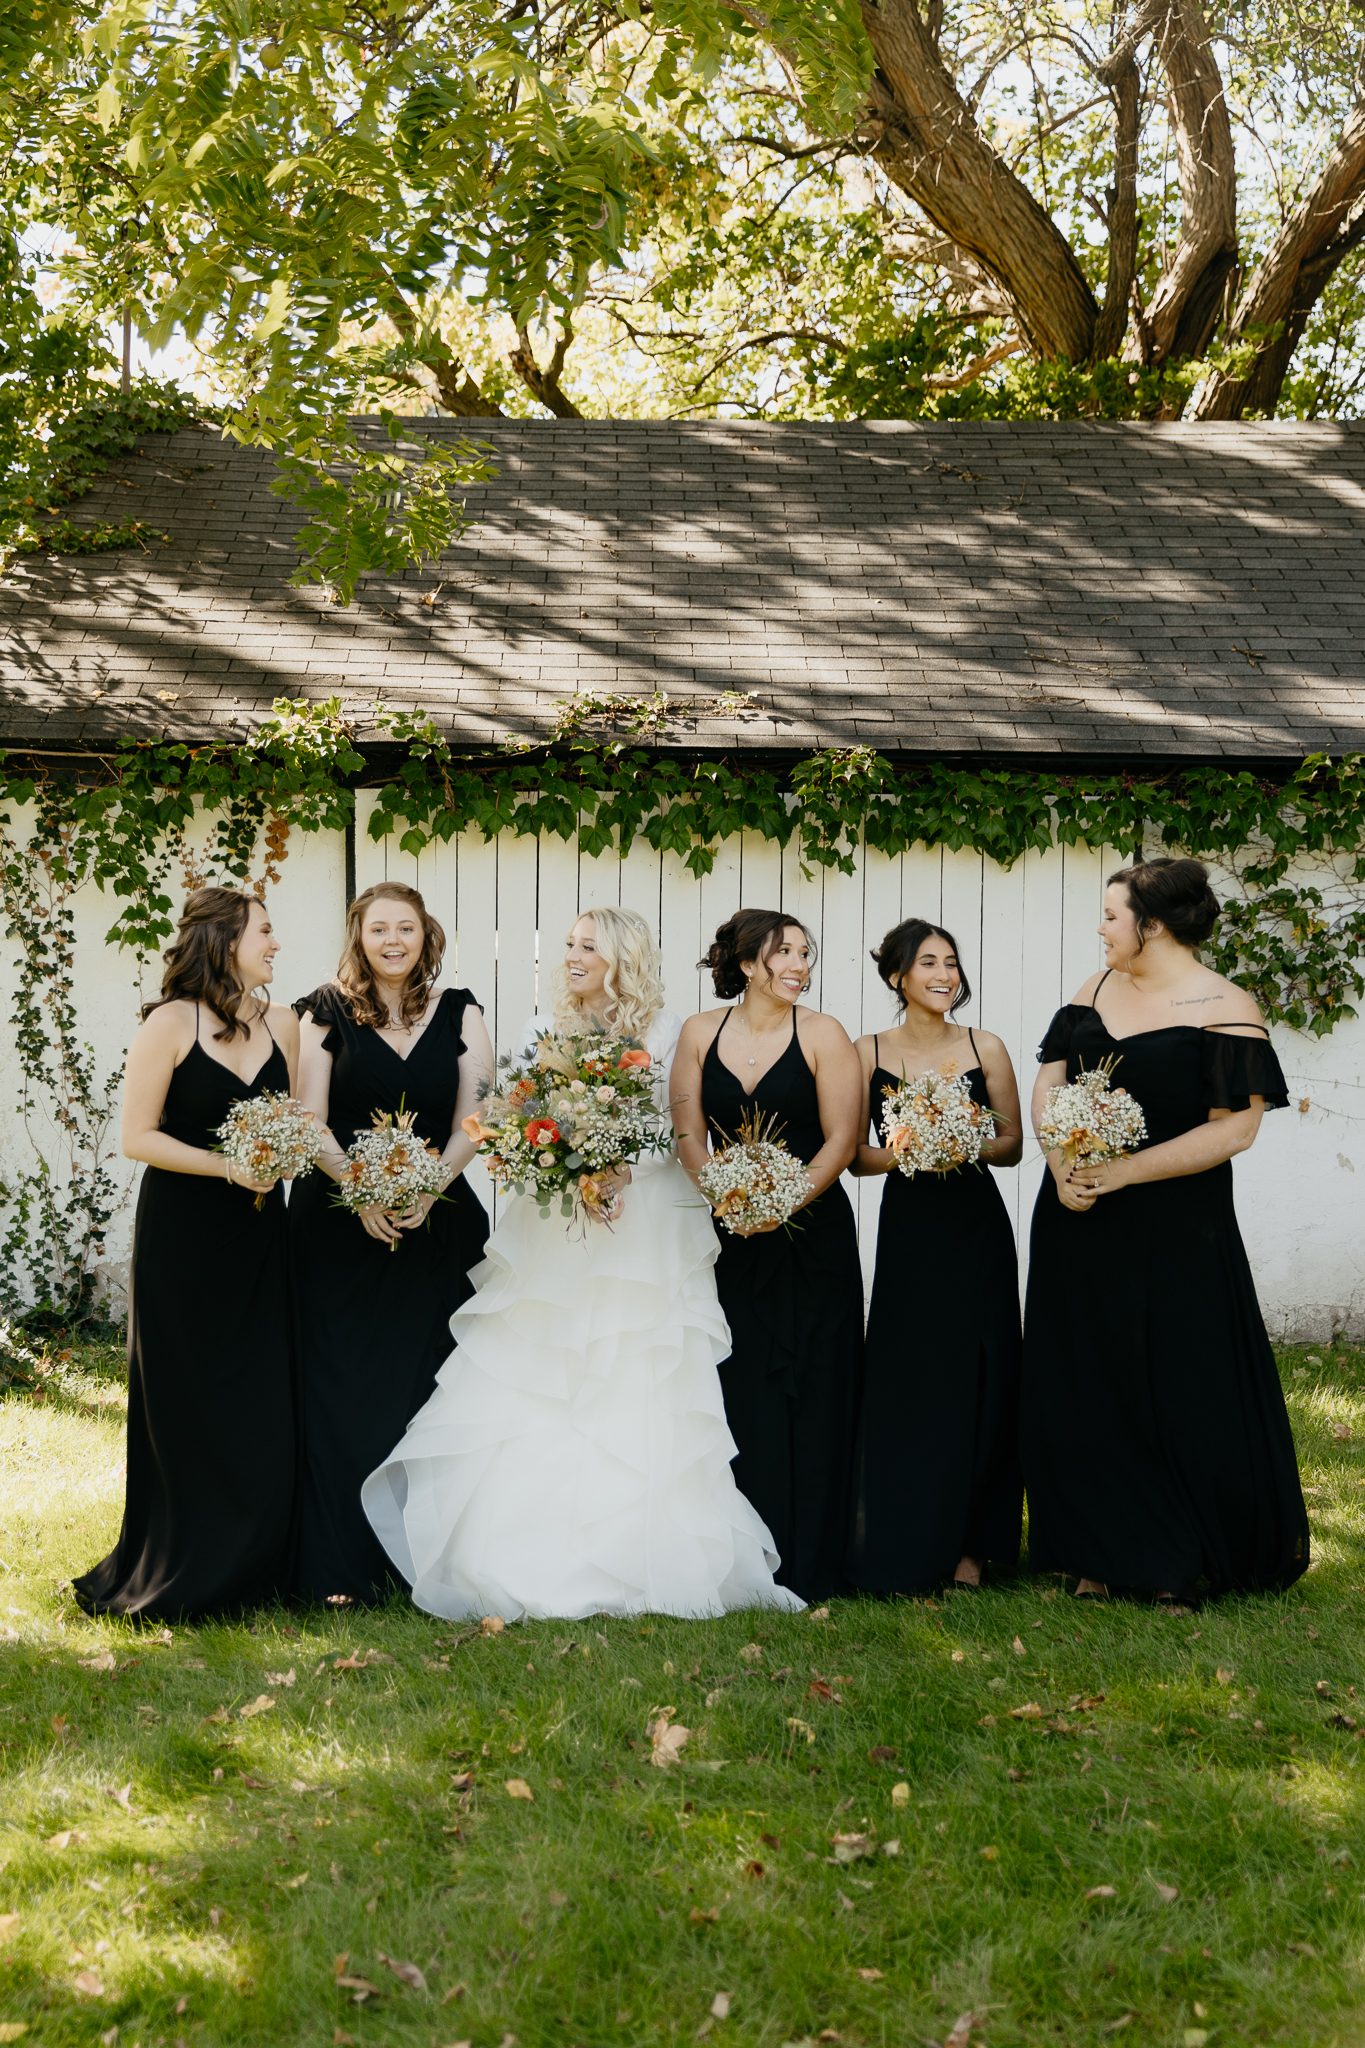 Bridesmaids and bride smile and laugh together with bouquets, standing in front of an ivy covered white barn at Northfork Farm